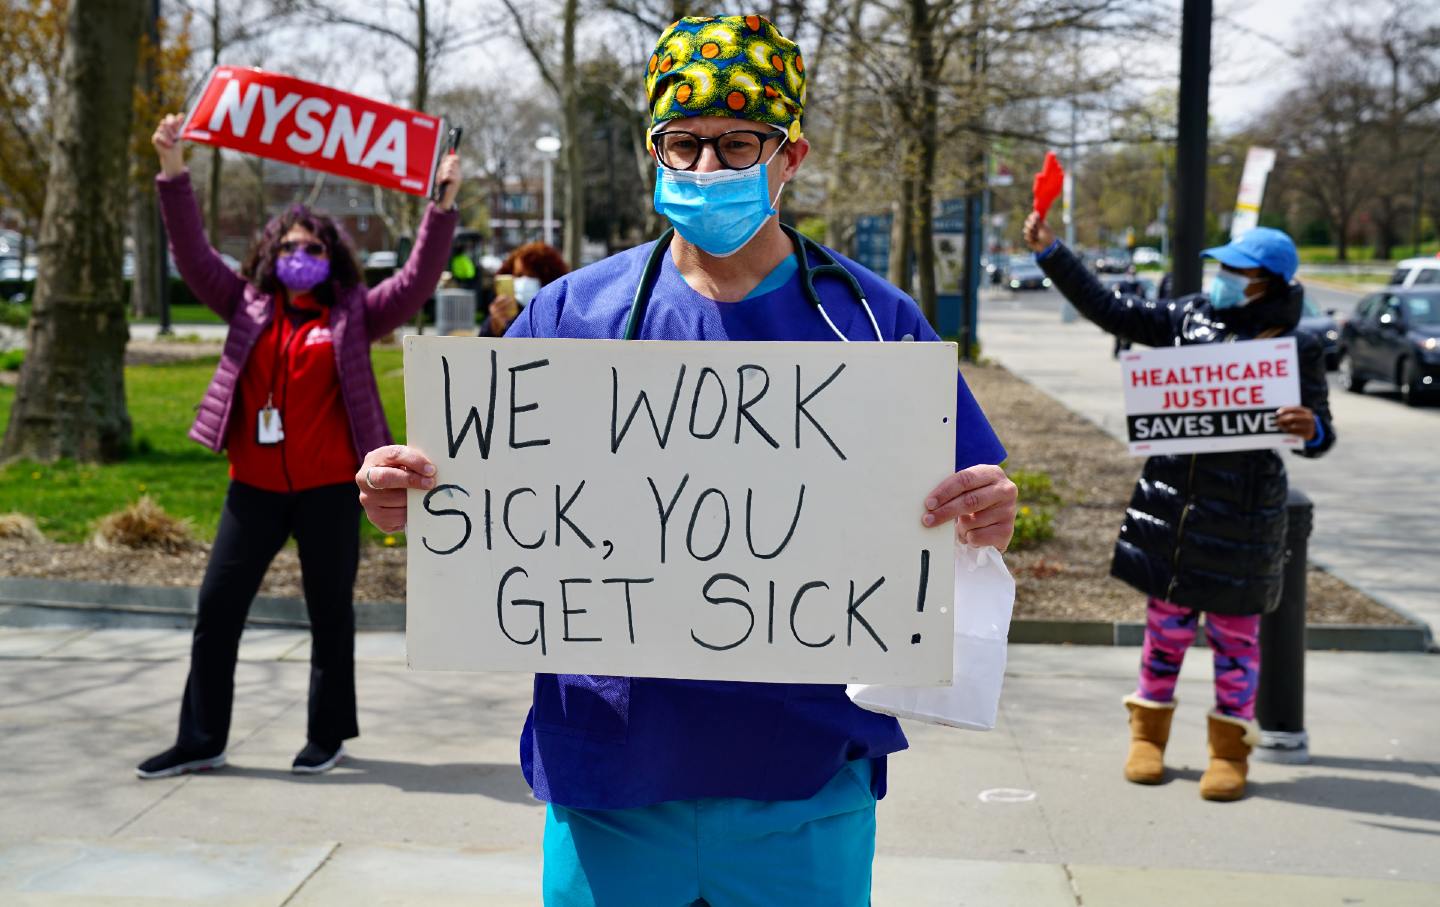 Three people protest, holding signs and wearing masks. The one in the center front holds a sign that reads 